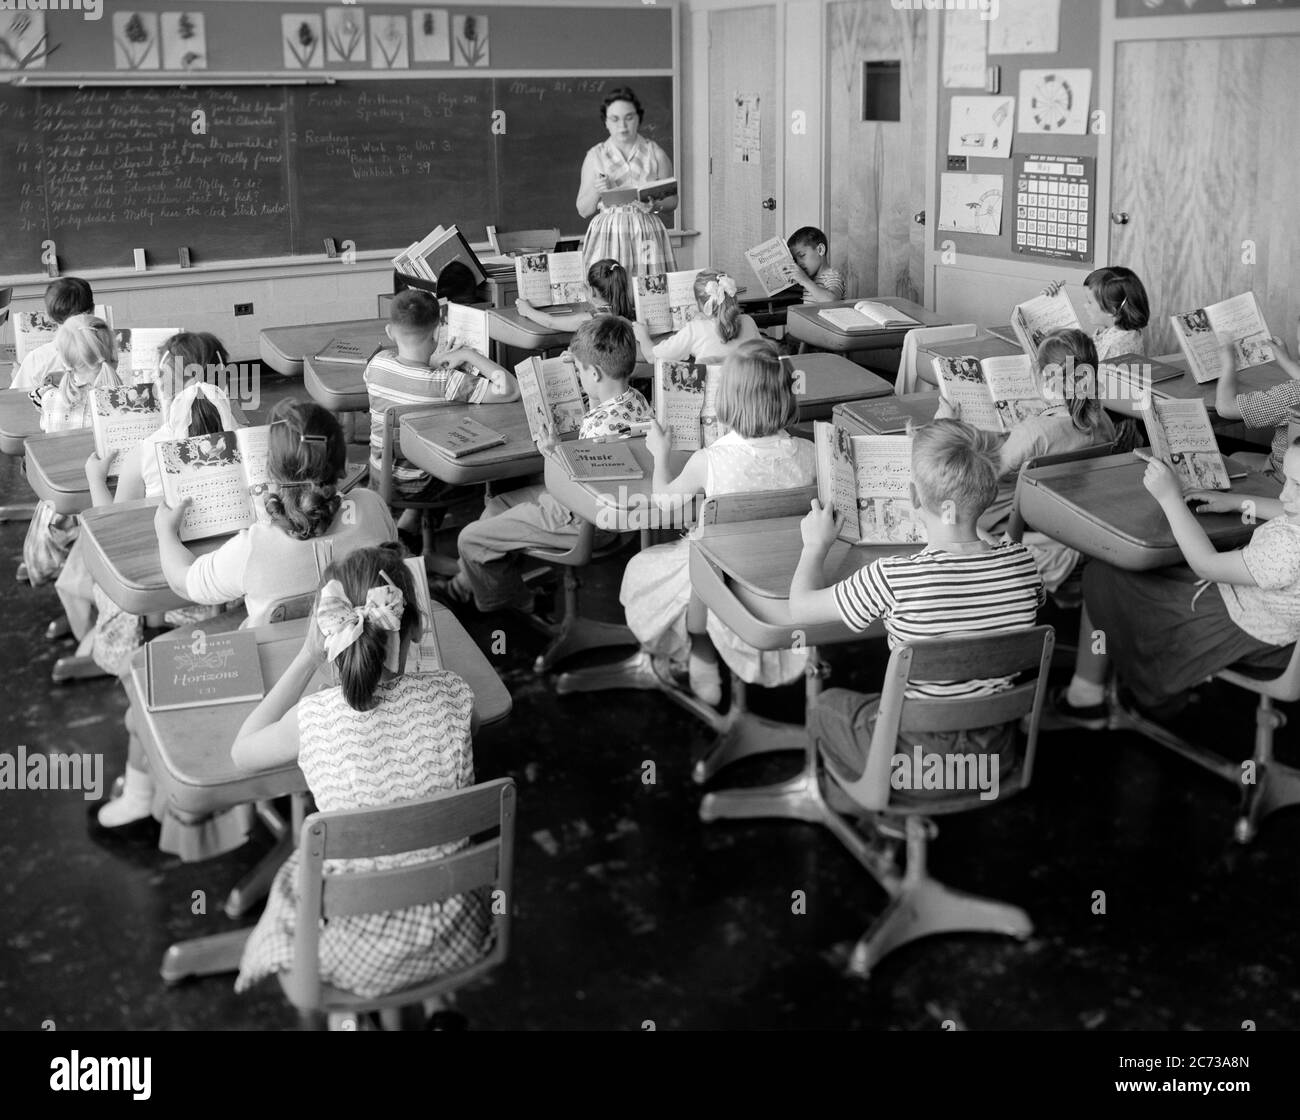 1950s 1960s ELEMENTARY SCHOOL CLASSROOM TEACHER WOMAN AND STUDENTS READING FROM OPEN TEXTBOOKS LEARNING BLACKBOARD DESKS - s12003 HEL001 HARS COPY SPACE HALF-LENGTH LADIES PERSONS INSPIRATION MALES MIDDLE-AGED B&W DESKS SCHOOLS GRADE HIGH ANGLE DISCOVERY AND INSTRUCTOR OCCUPATIONS PRIMARY TEXTBOOKS EDUCATOR COMMUNICATE COOPERATION EDUCATING EDUCATORS GRADE SCHOOL GROWTH INSTRUCTORS JUVENILES MID-ADULT WOMAN PRE-TEEN PRE-TEEN BOY PRE-TEEN GIRL SCHOOL TEACHES TOGETHERNESS BLACK AND WHITE CAUCASIAN ETHNICITY OLD FASHIONED Stock Photo